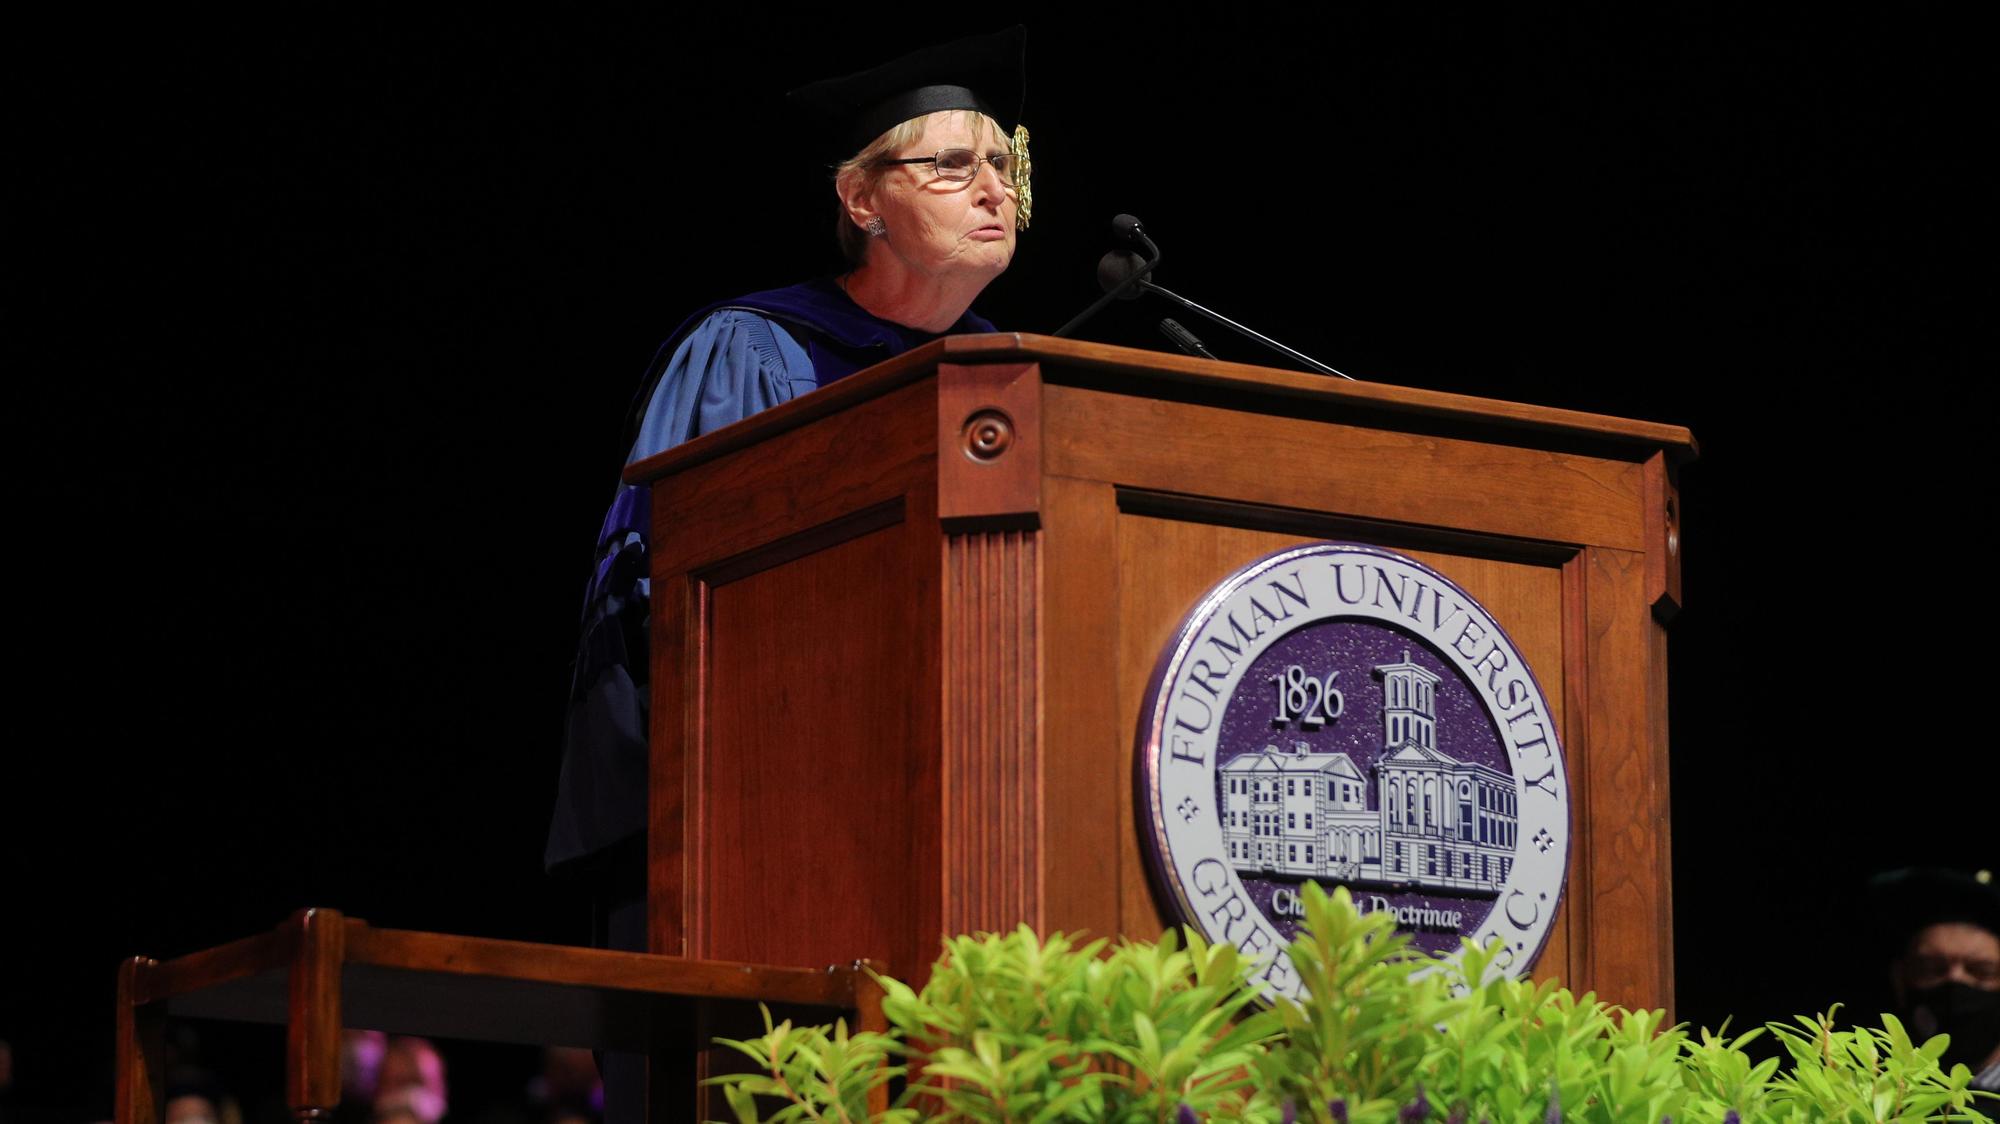 Marian E. Strobel, the William Montgomery Burnett Professor of History, delivers the address at the Fall 2021 Opening Convocation ceremony.